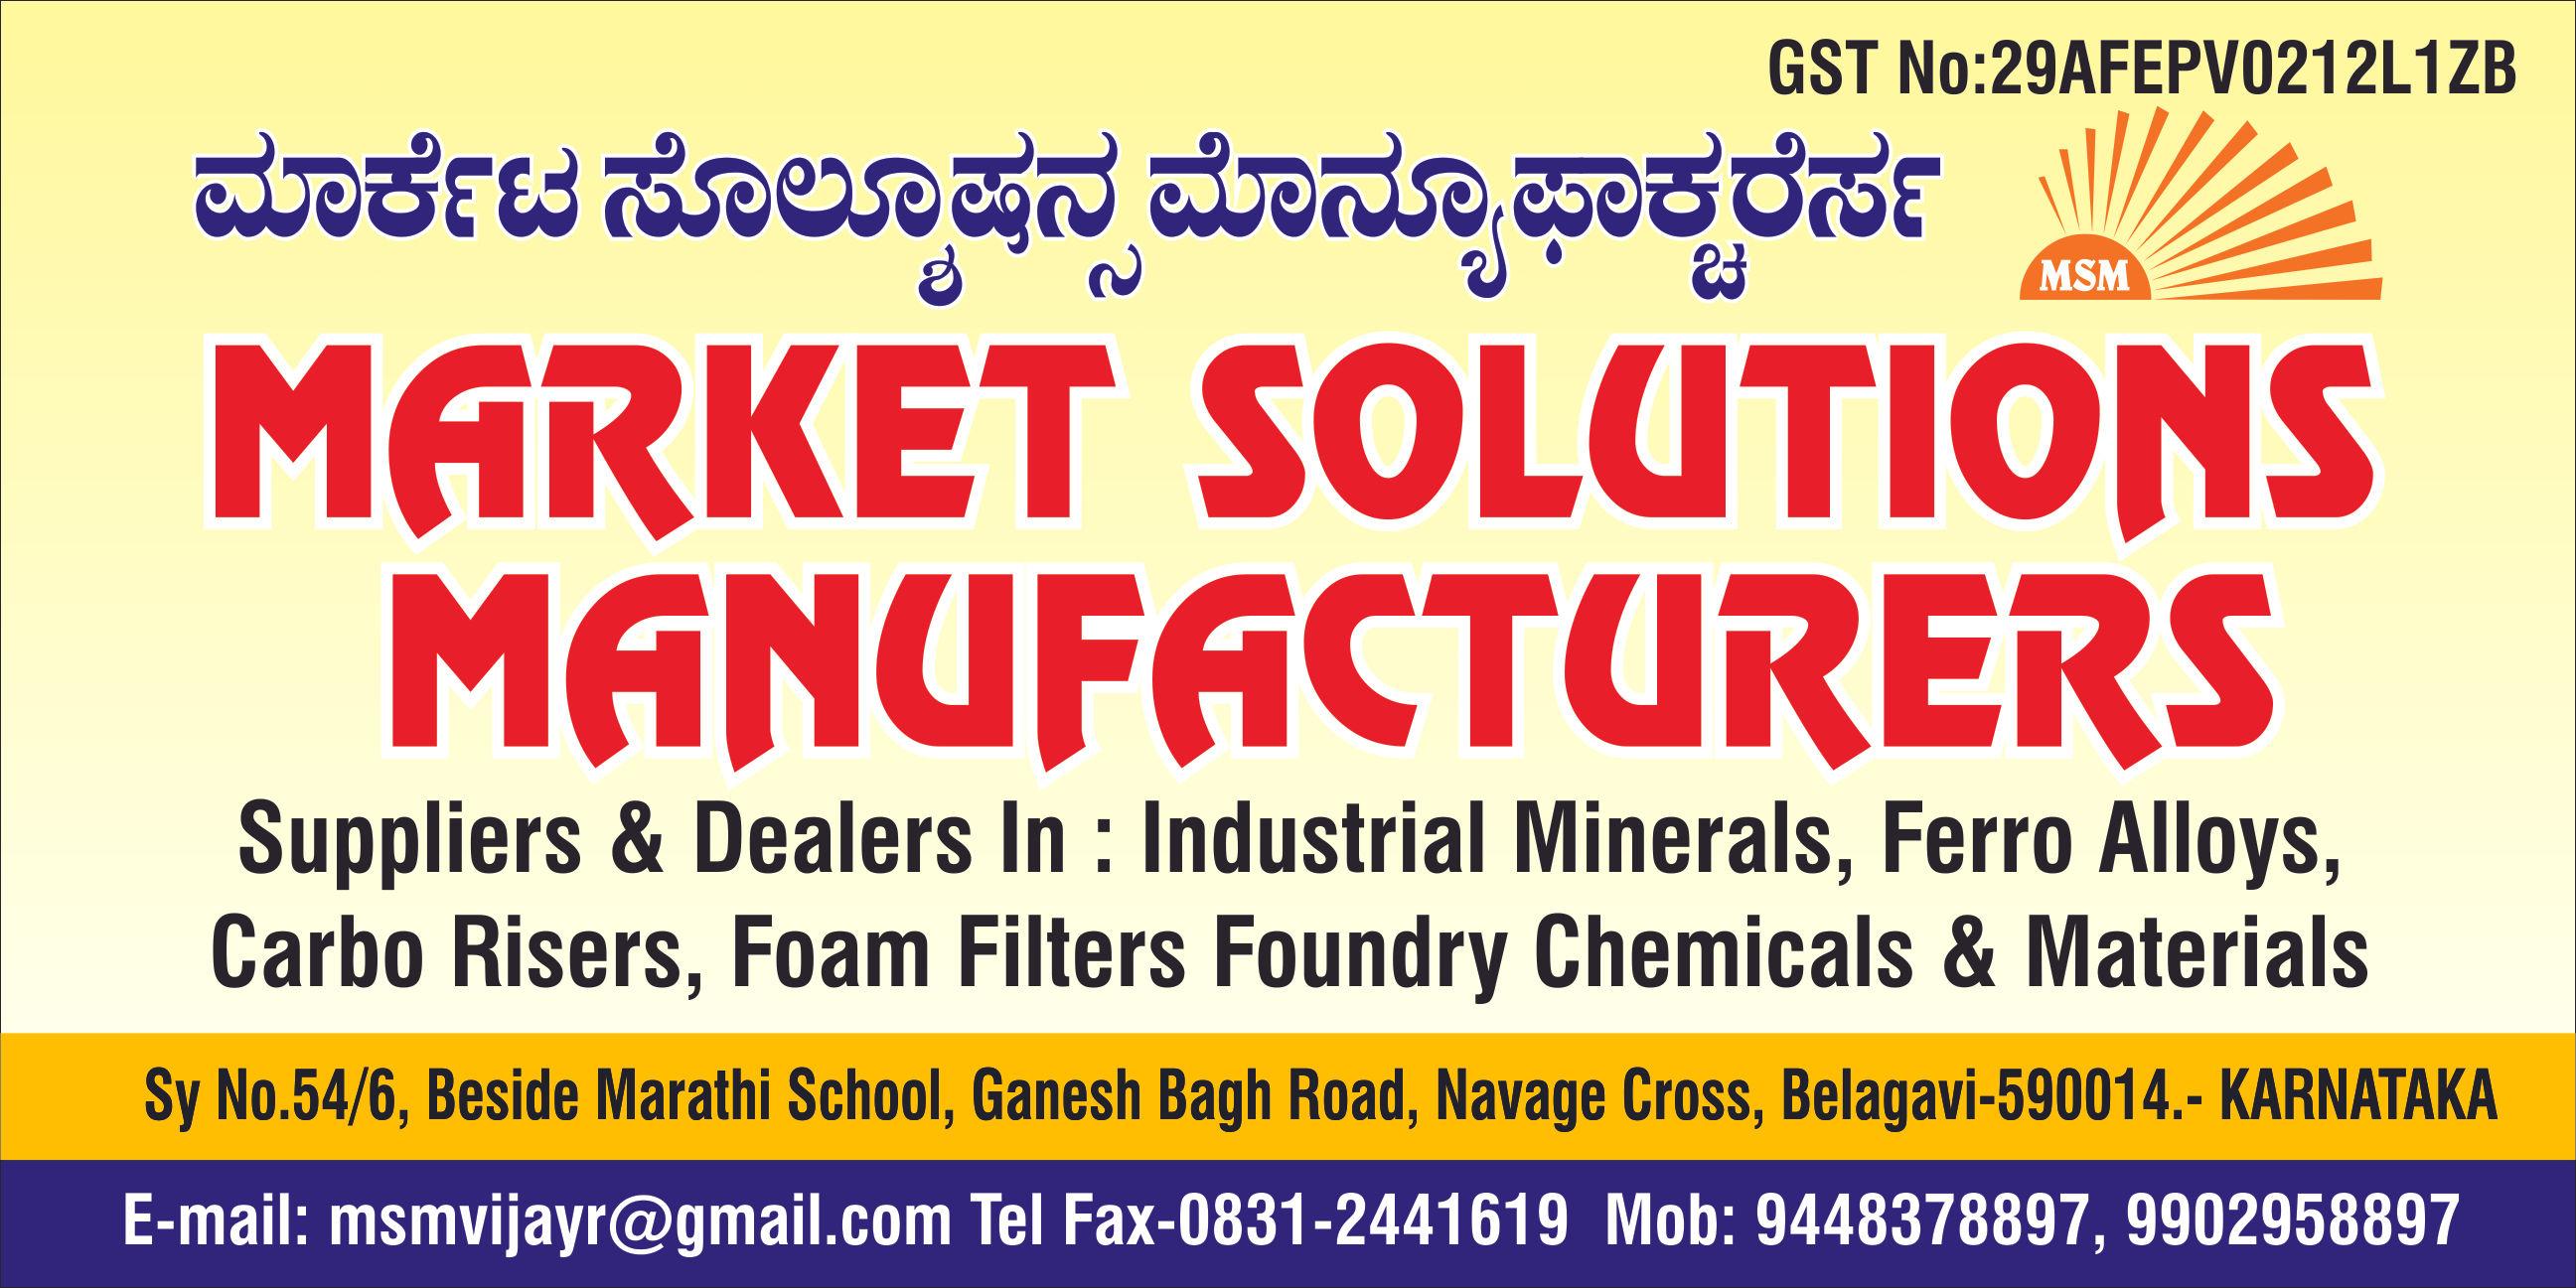 MARKET SOLUTIONS MANUFACTURERS